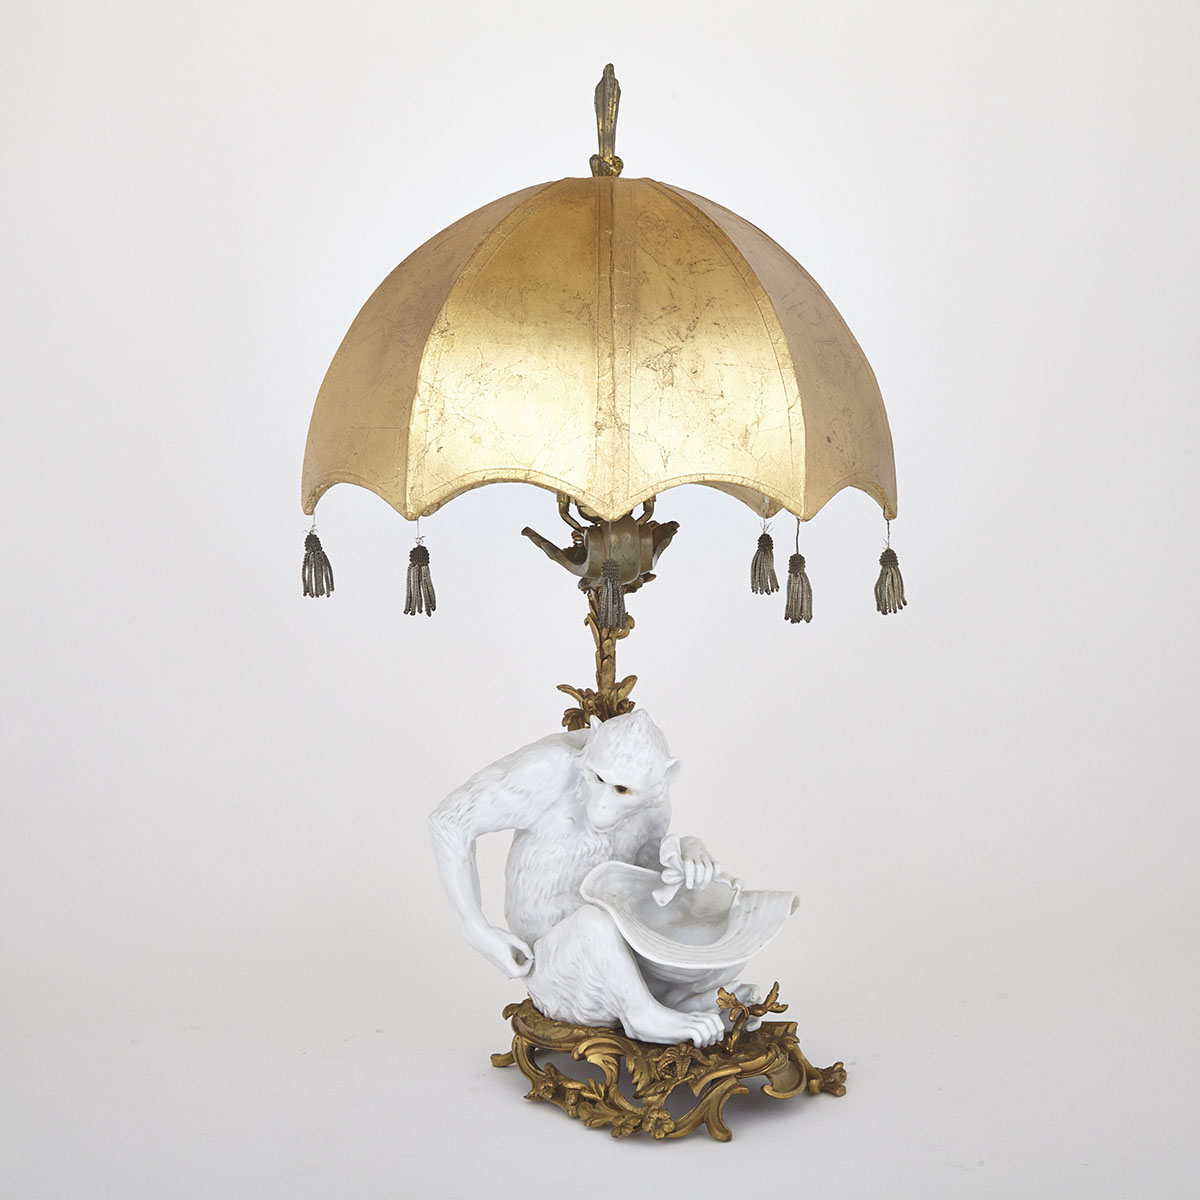 French Porcelain Mounted Gilt Bronze Monkey Form Table Lamp, 19th century